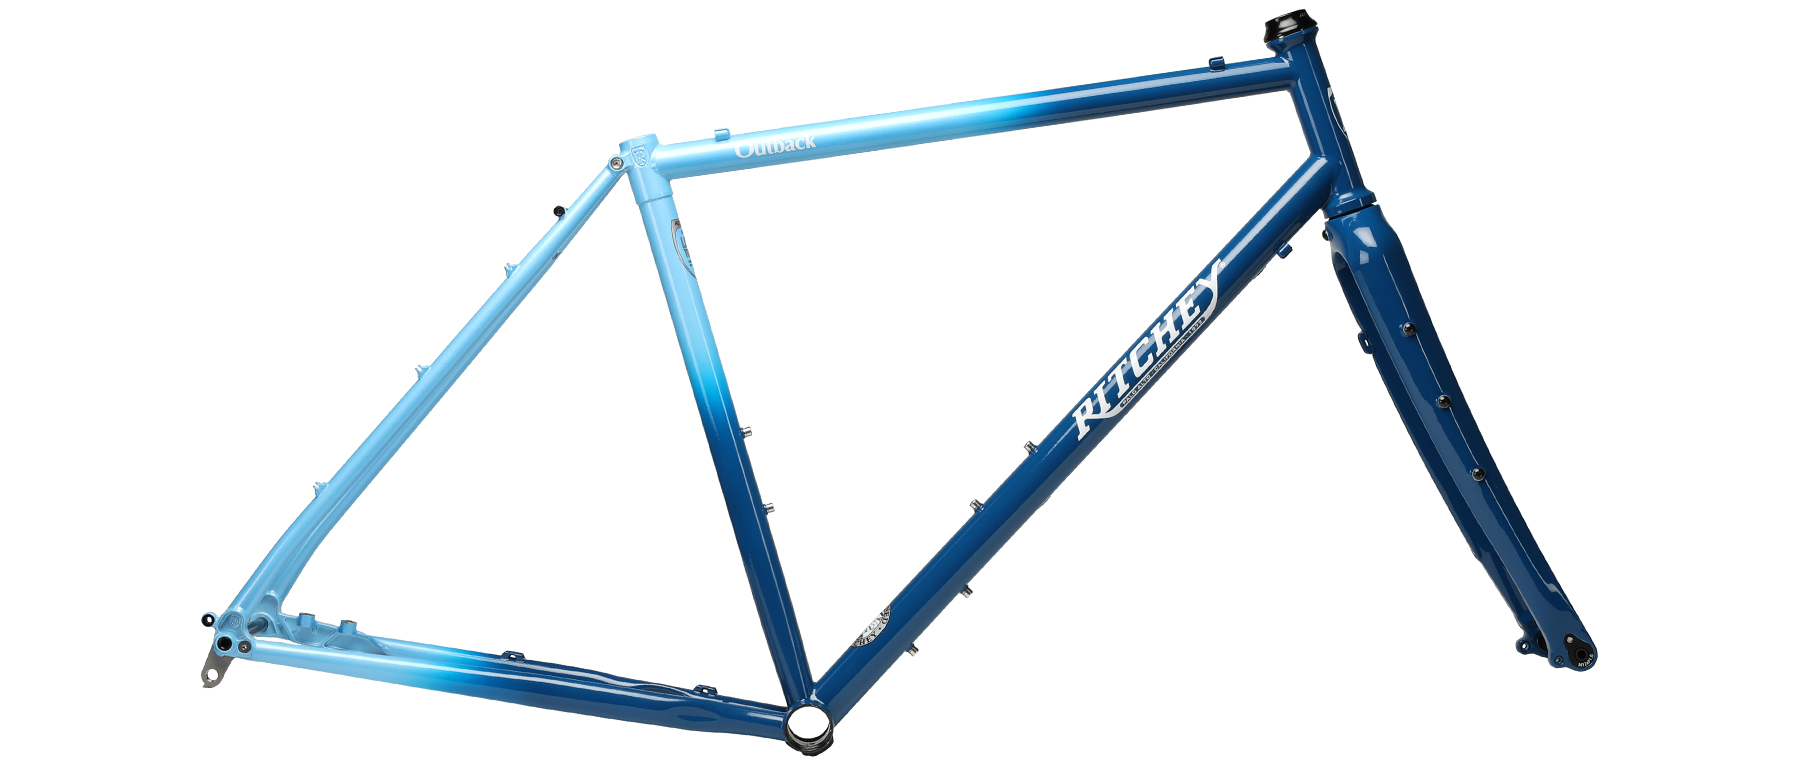 Ritchey Outback 50th Anniversary Frameset